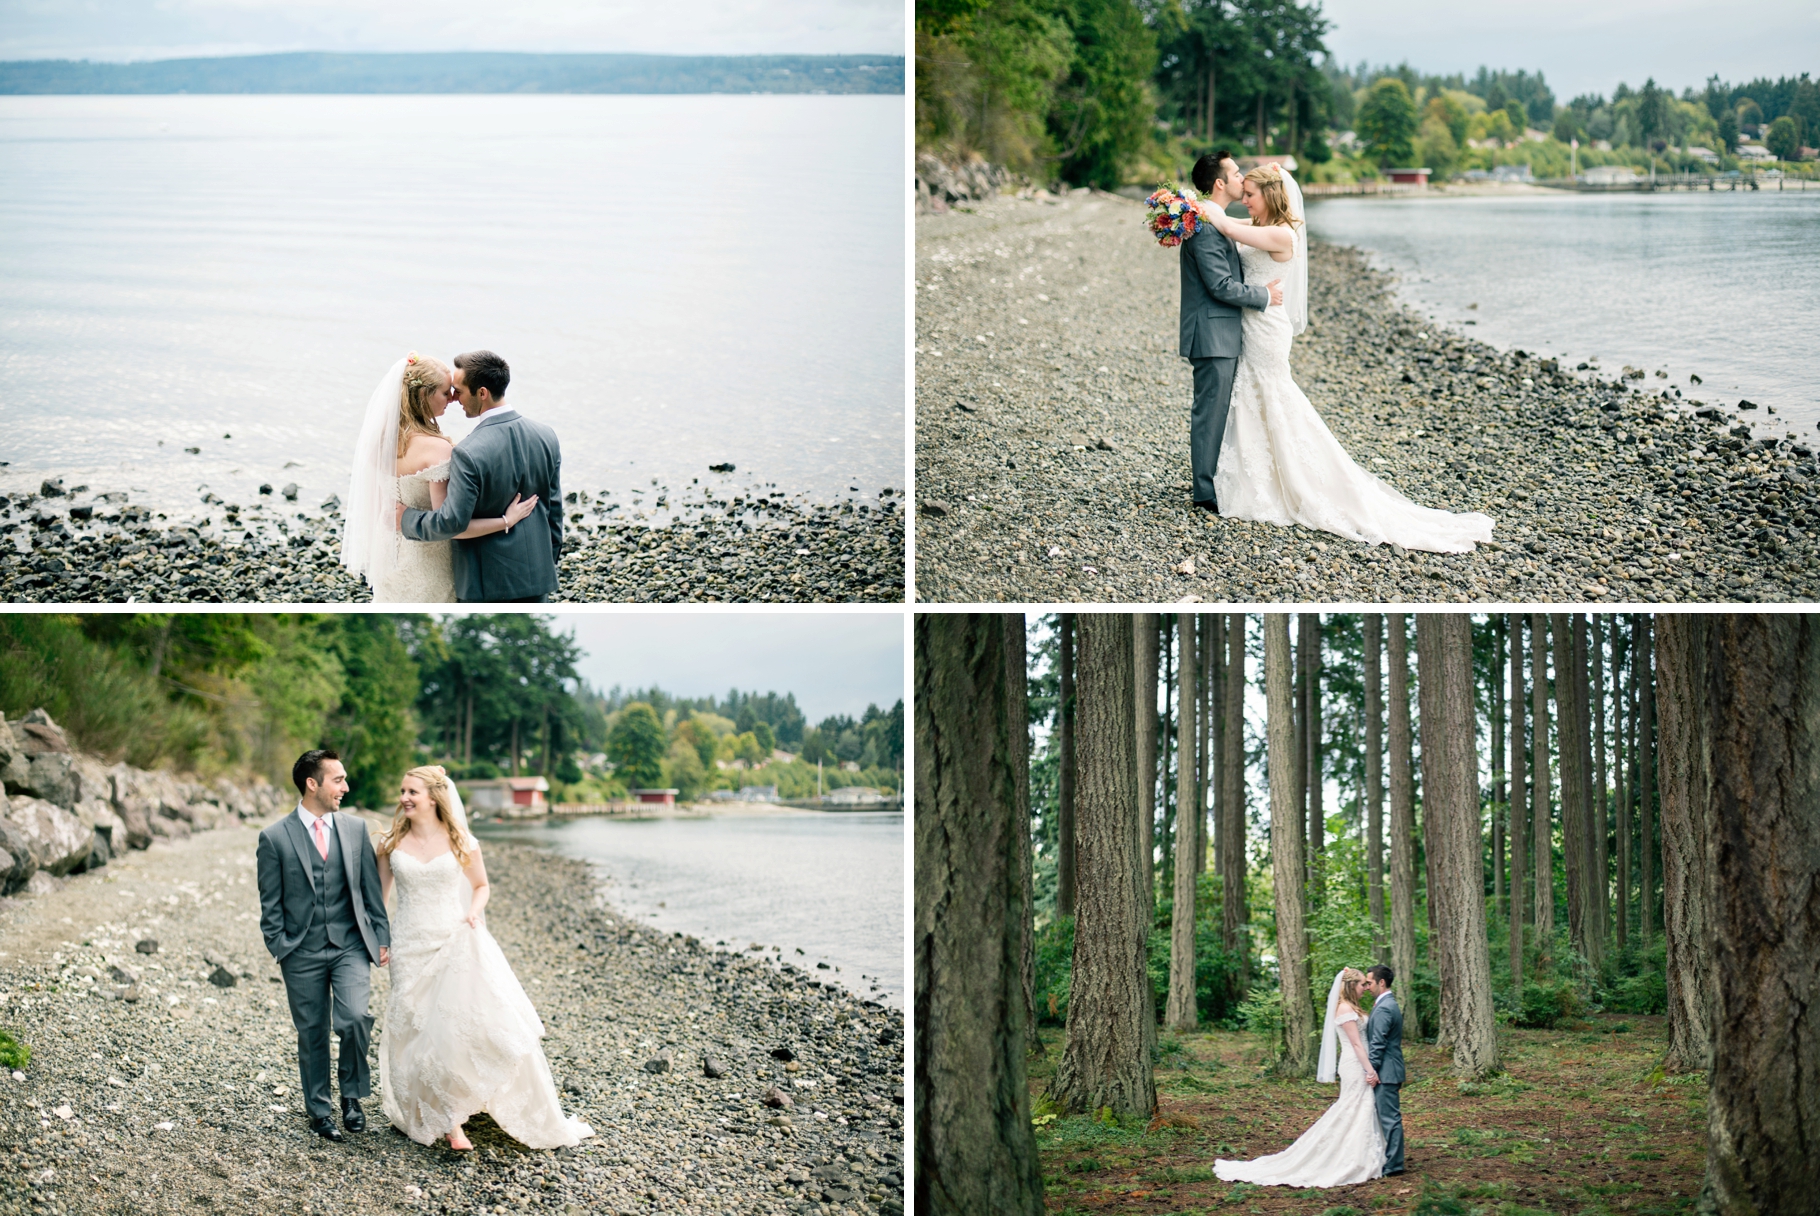 46-Bride-Groom-Portraits-Married-Bridal-Beach-Ocean-Romantic-wooded-bluff-olympic-mountains-log-cabin-Kitsap-Memorial-State-Park-Forest-Northwest-Photographer-Seattle-Wedding-Photography-by-Betty-Elaine